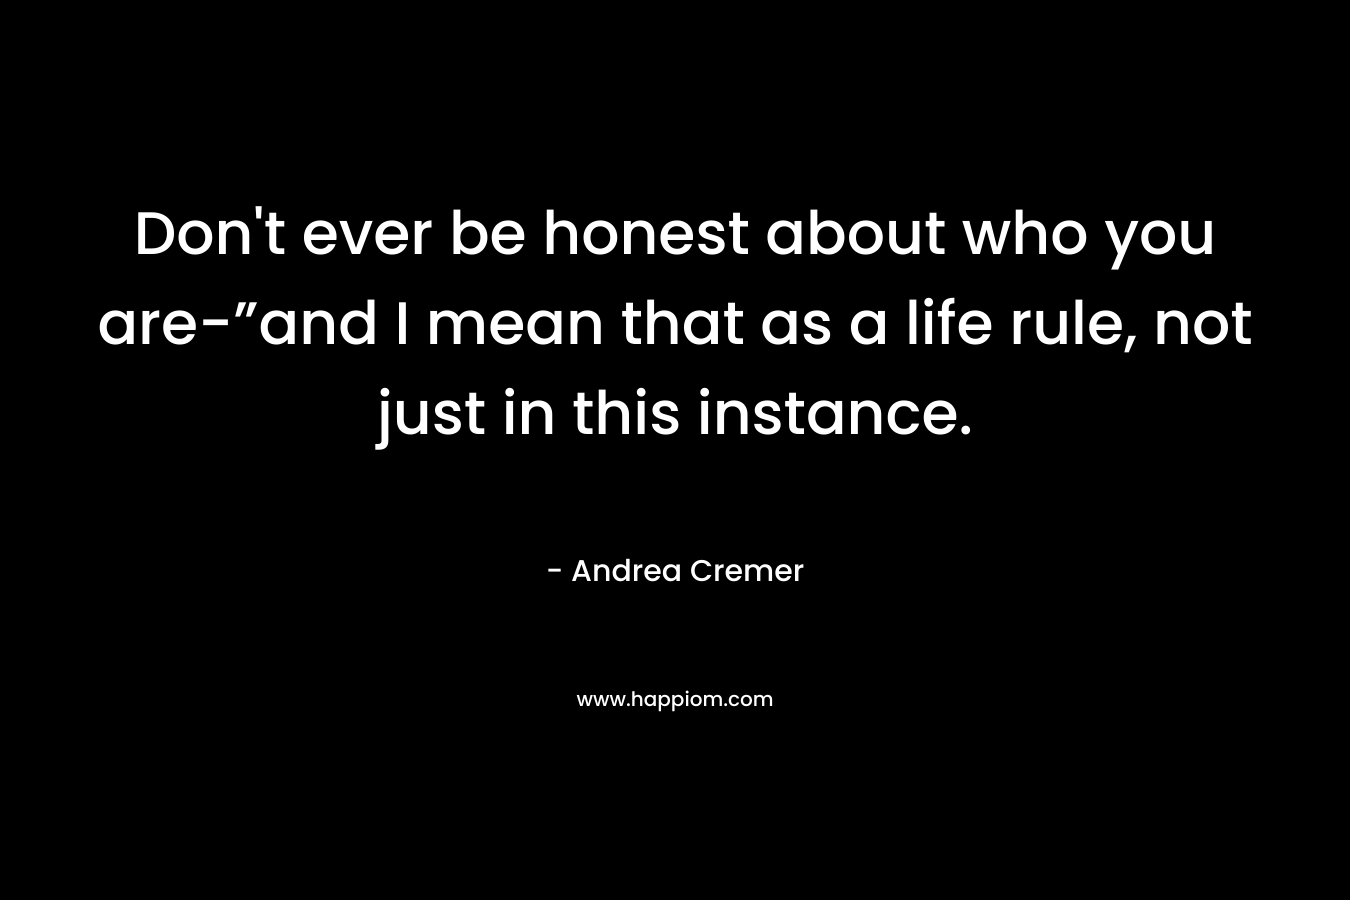 Don’t ever be honest about who you are-”and I mean that as a life rule, not just in this instance. – Andrea Cremer